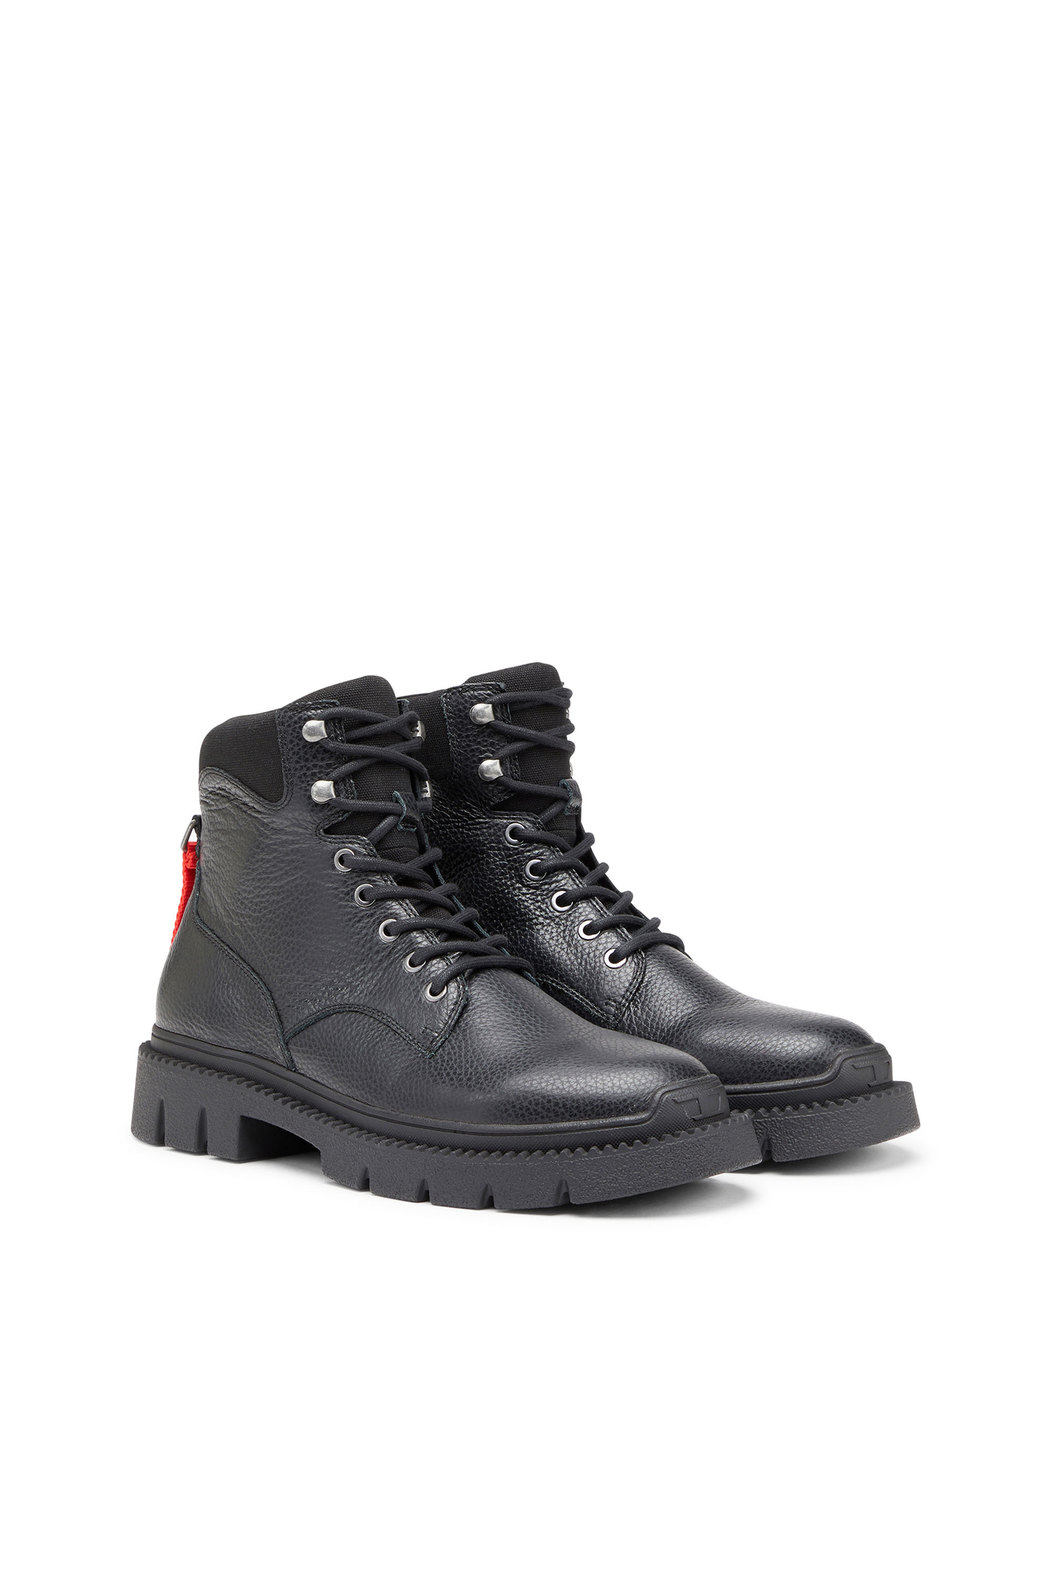 D-Troit BT - Lace-up boots with Diesel tape tag